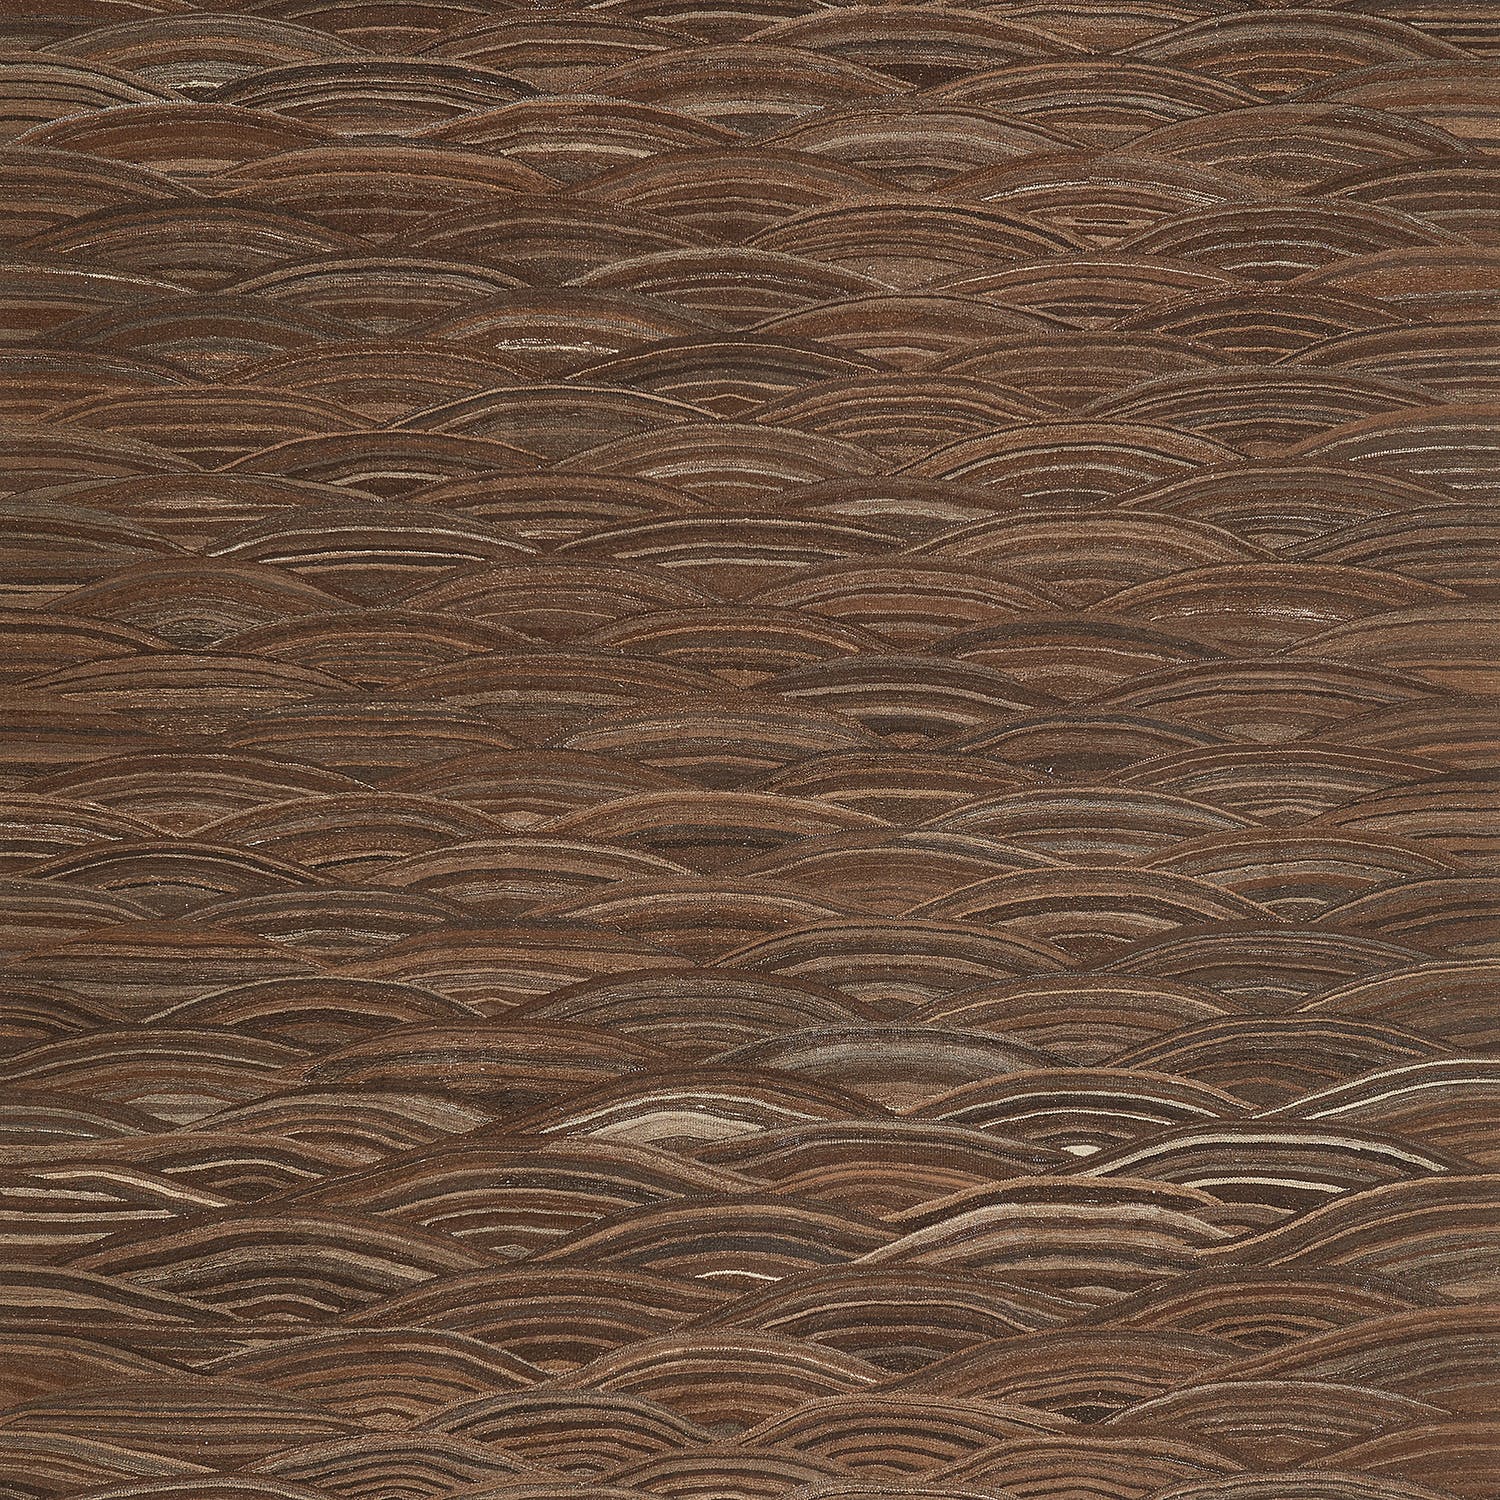 Intricate wood grain pattern with undulating lines and warm tones.